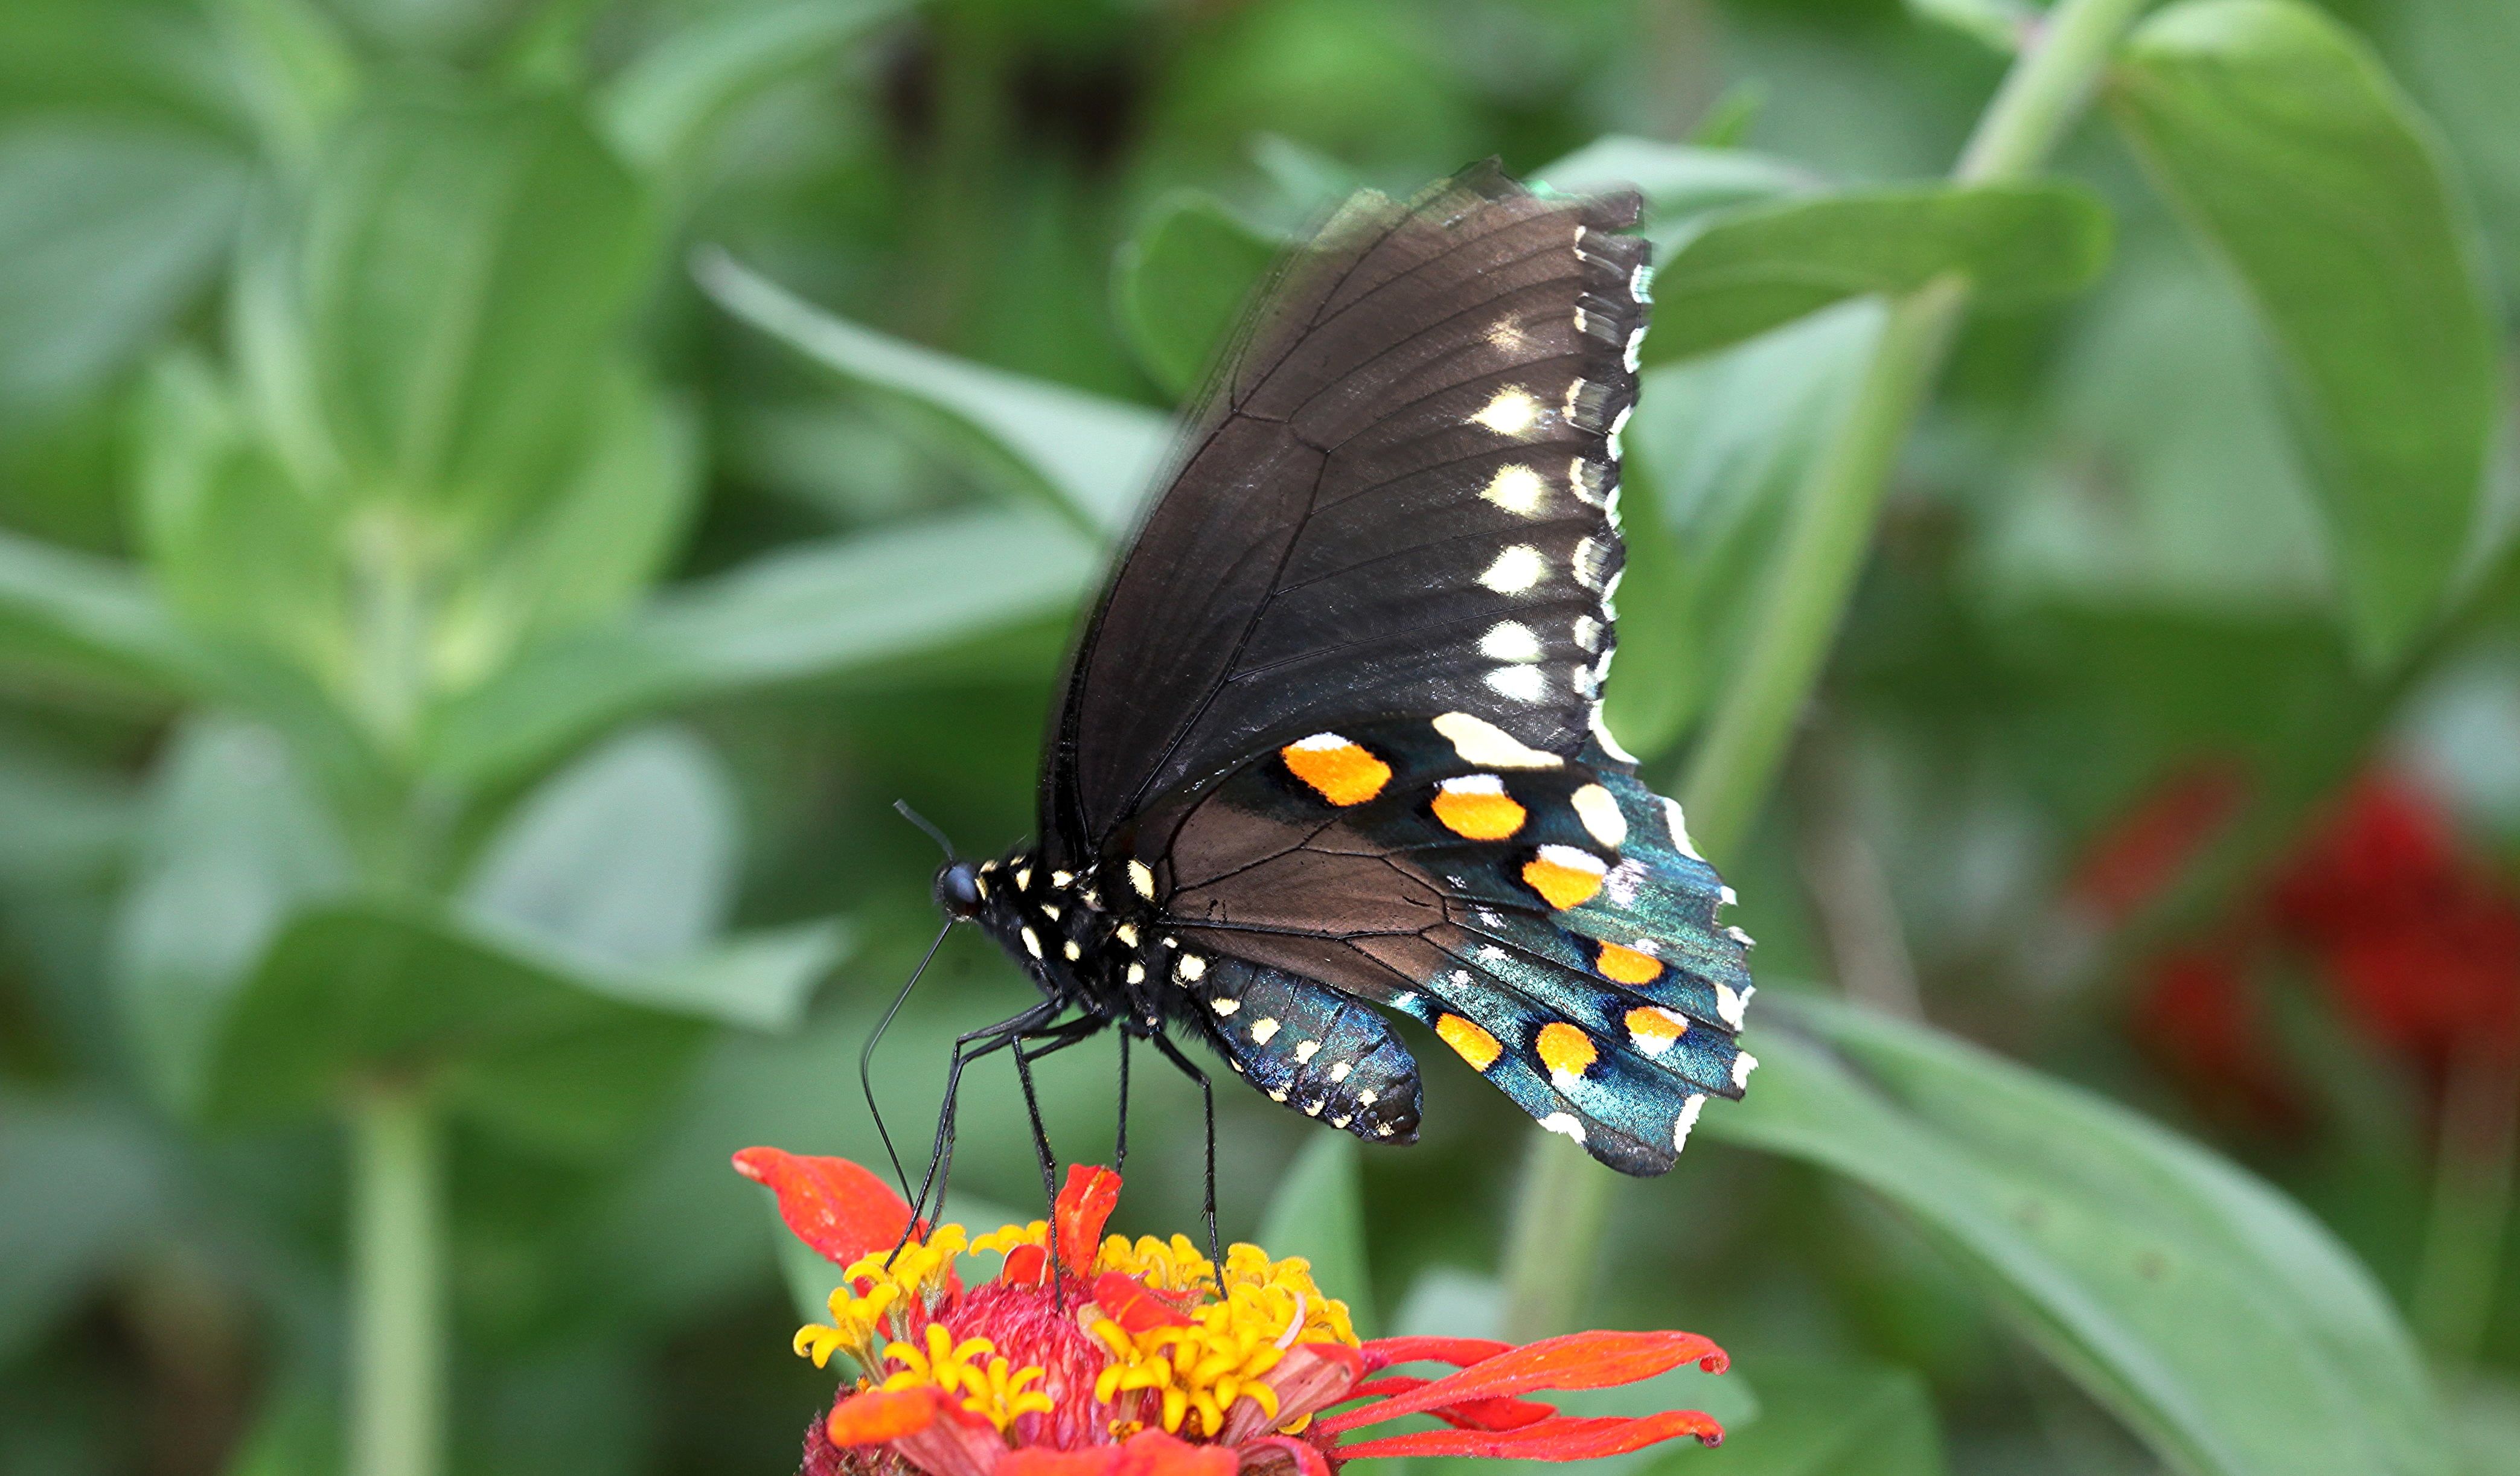 Black, blue, and white butterfly perched on red and yellow petaled